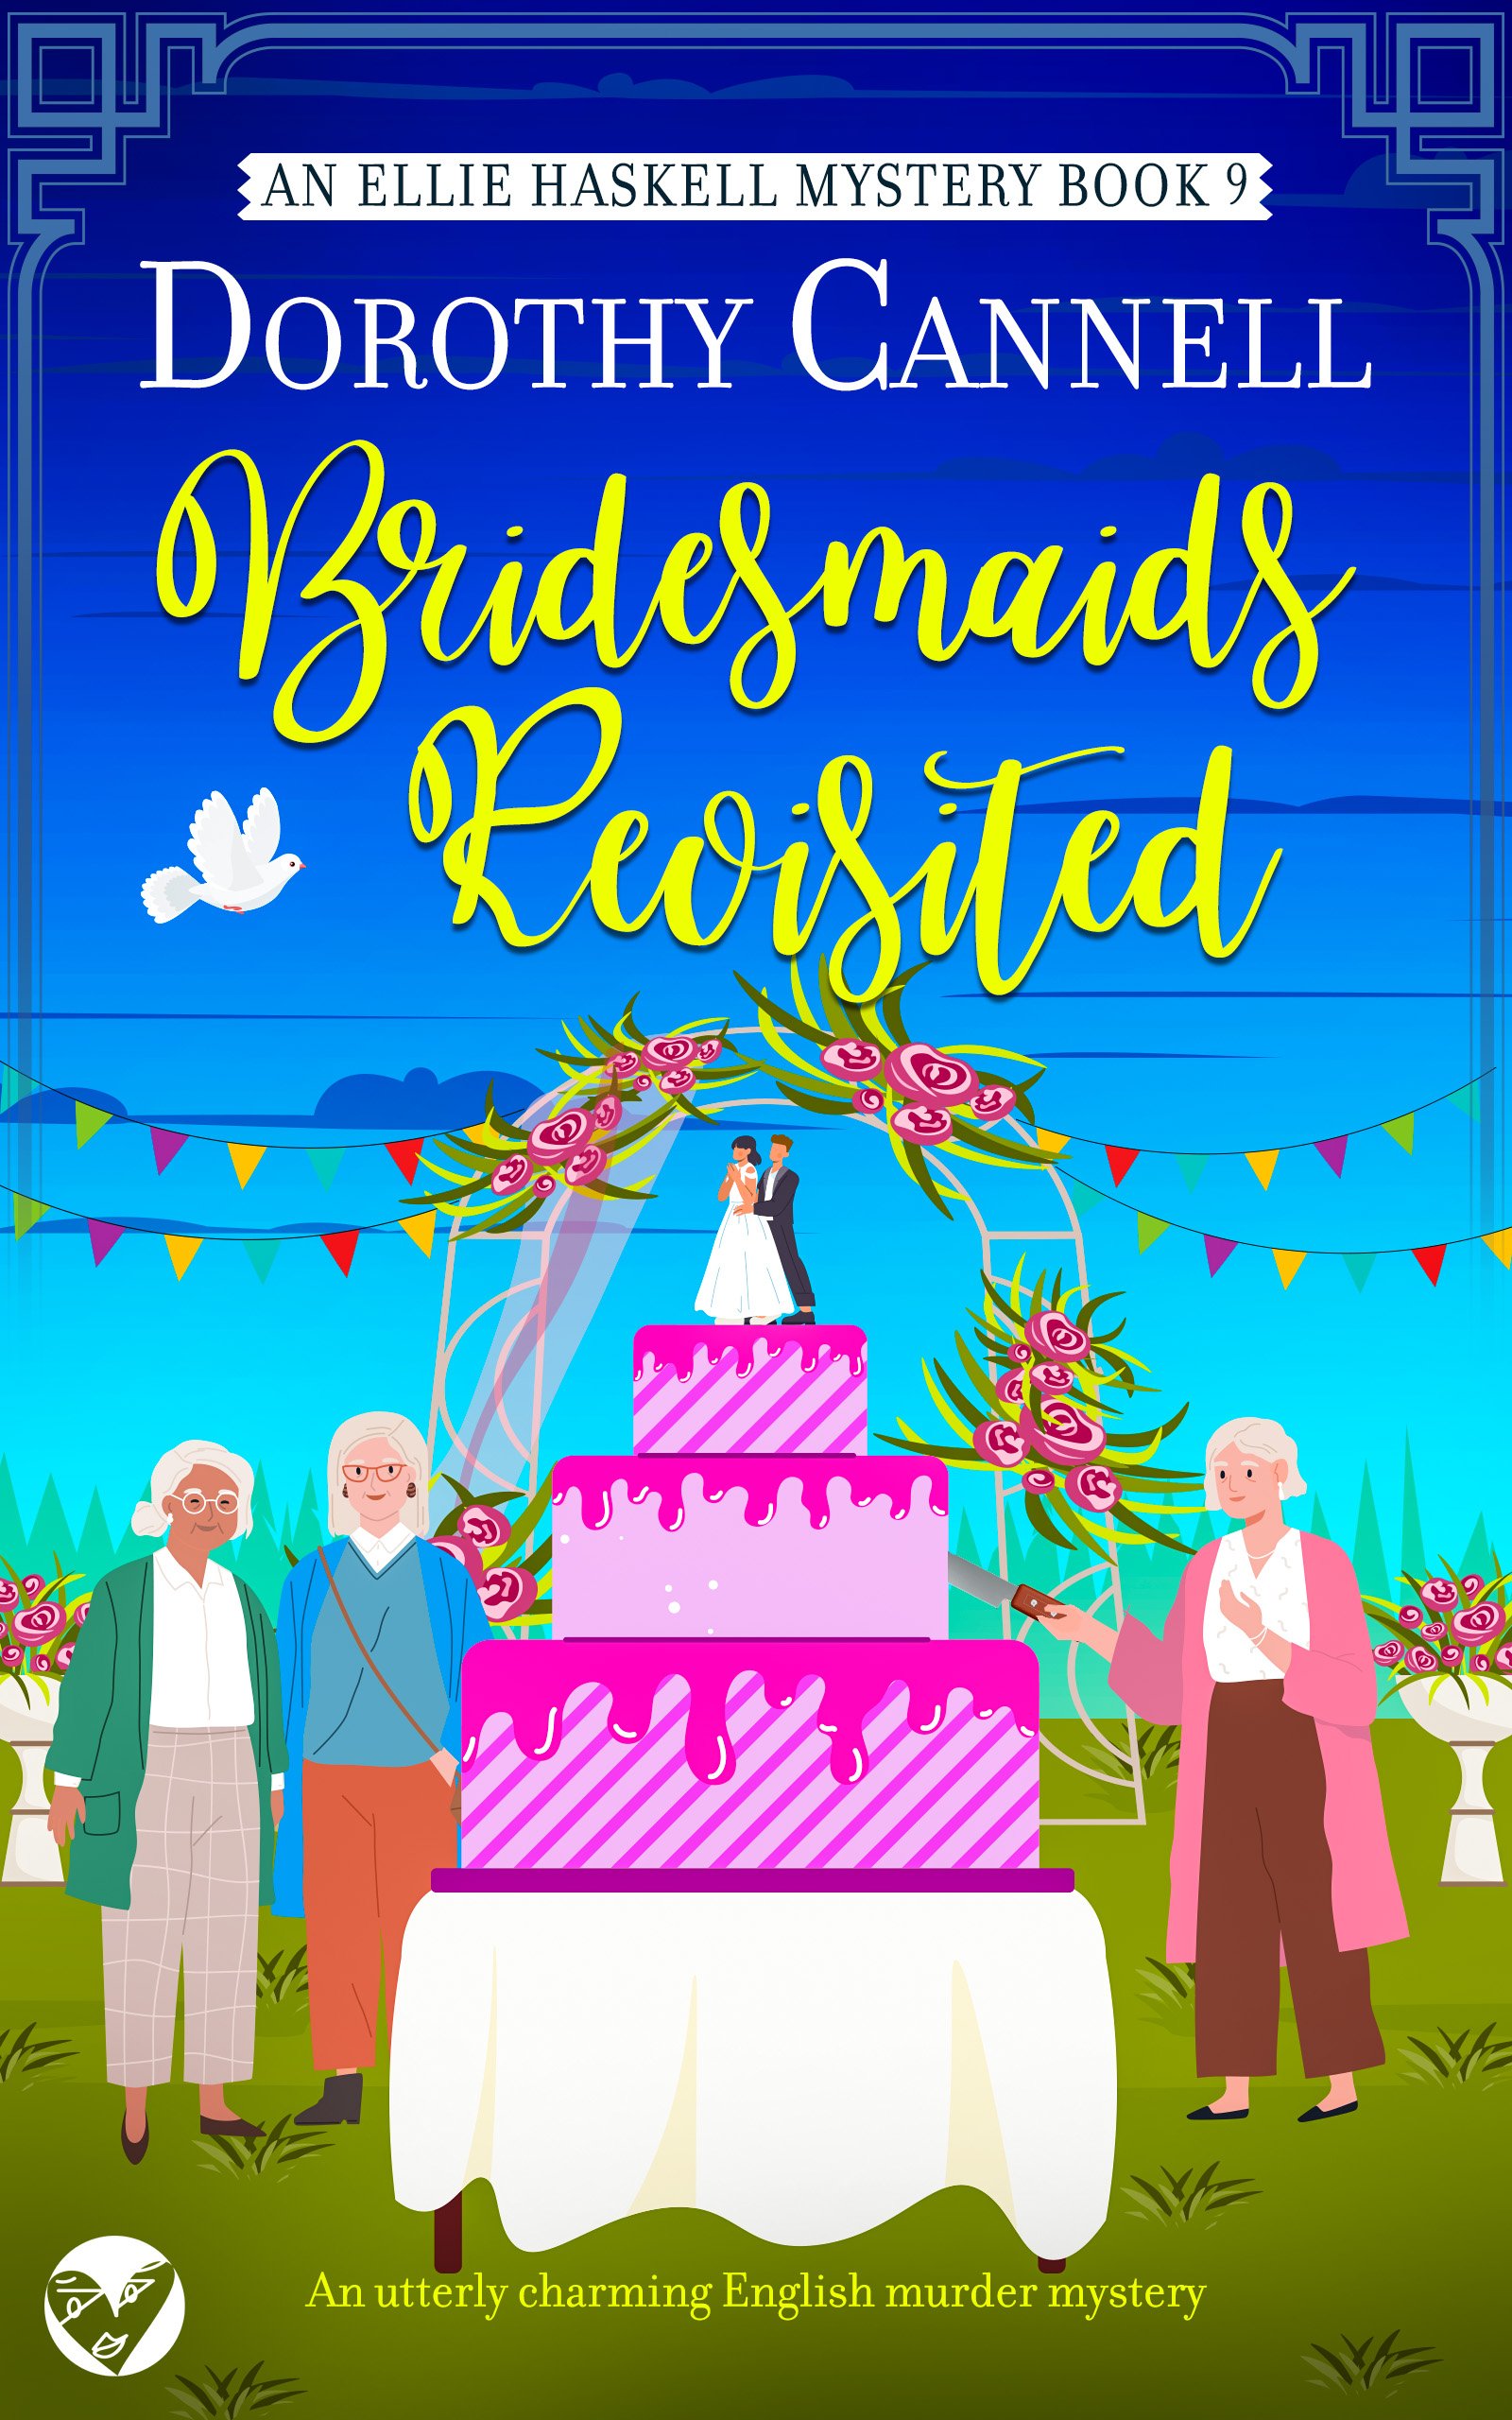 BRIDESMAID REVISITED Cover publish.jpg